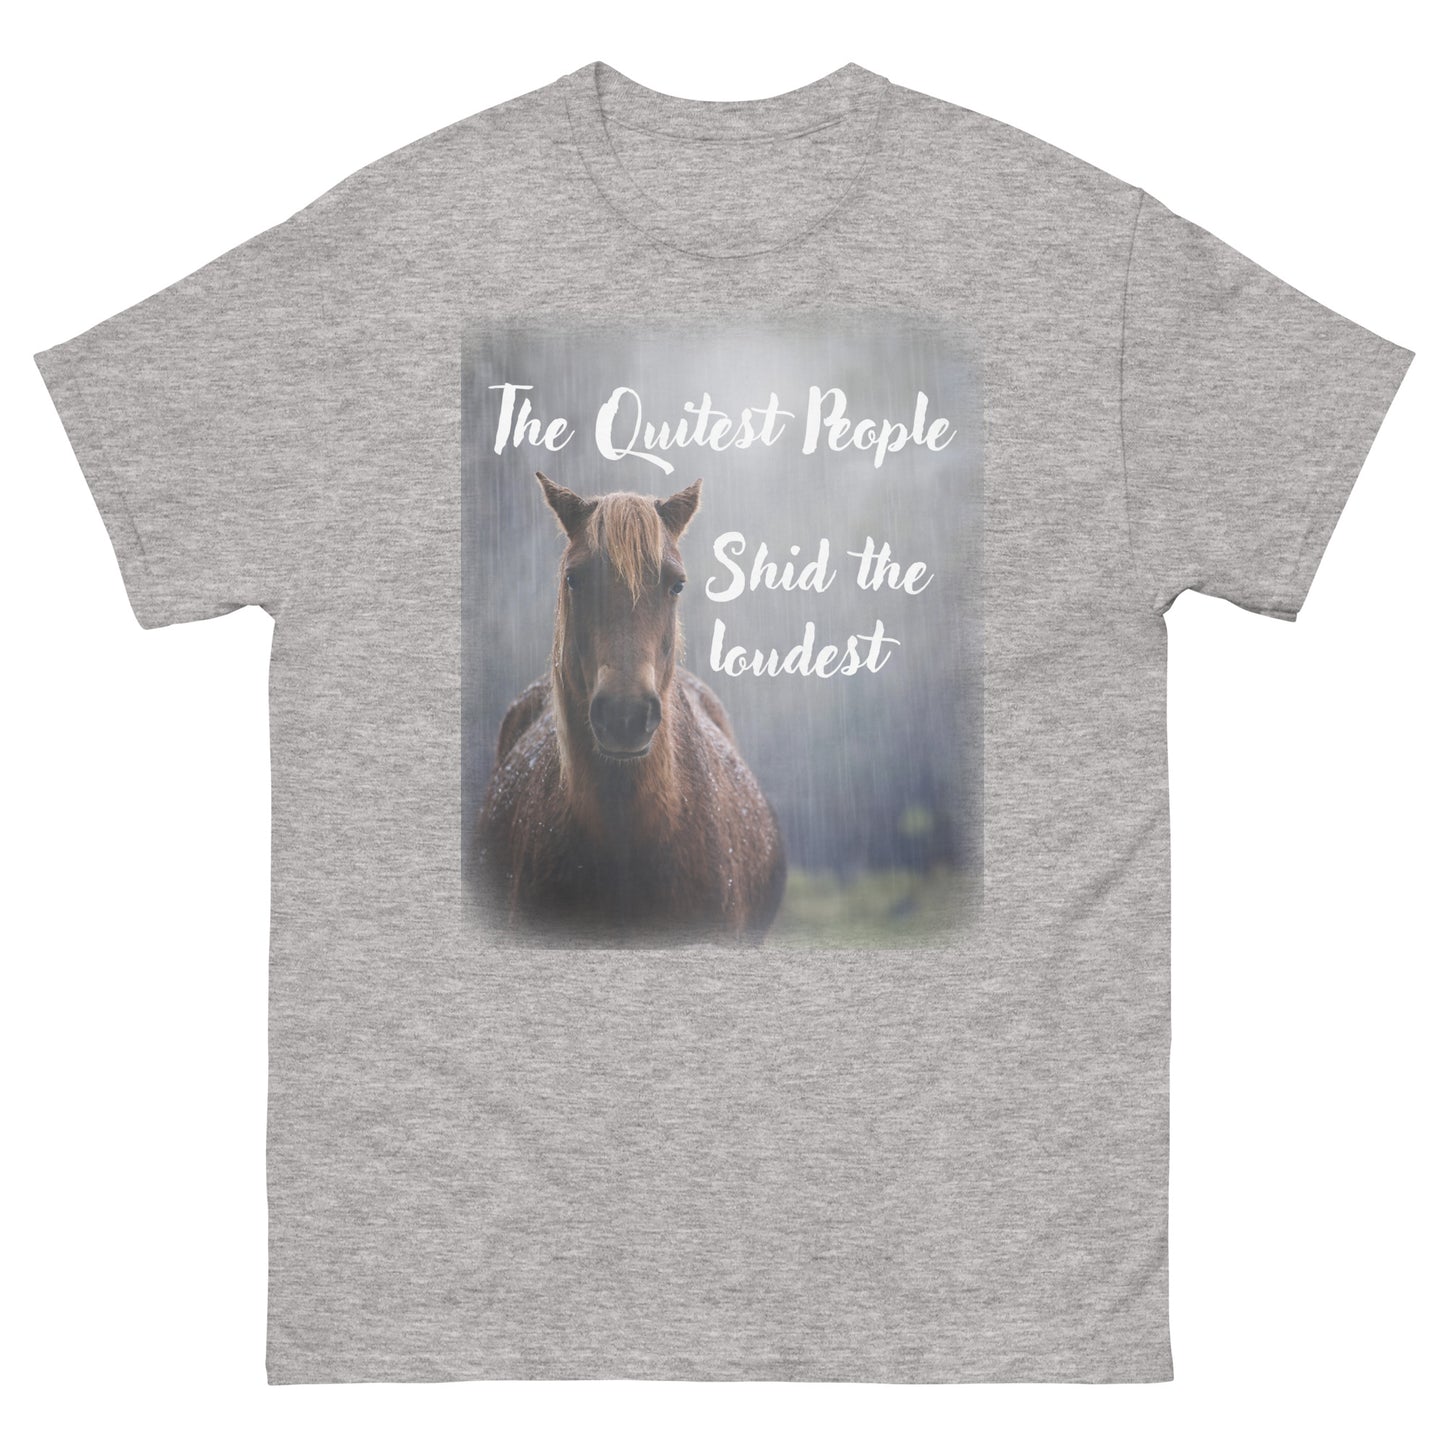 The Quietest People Shirt